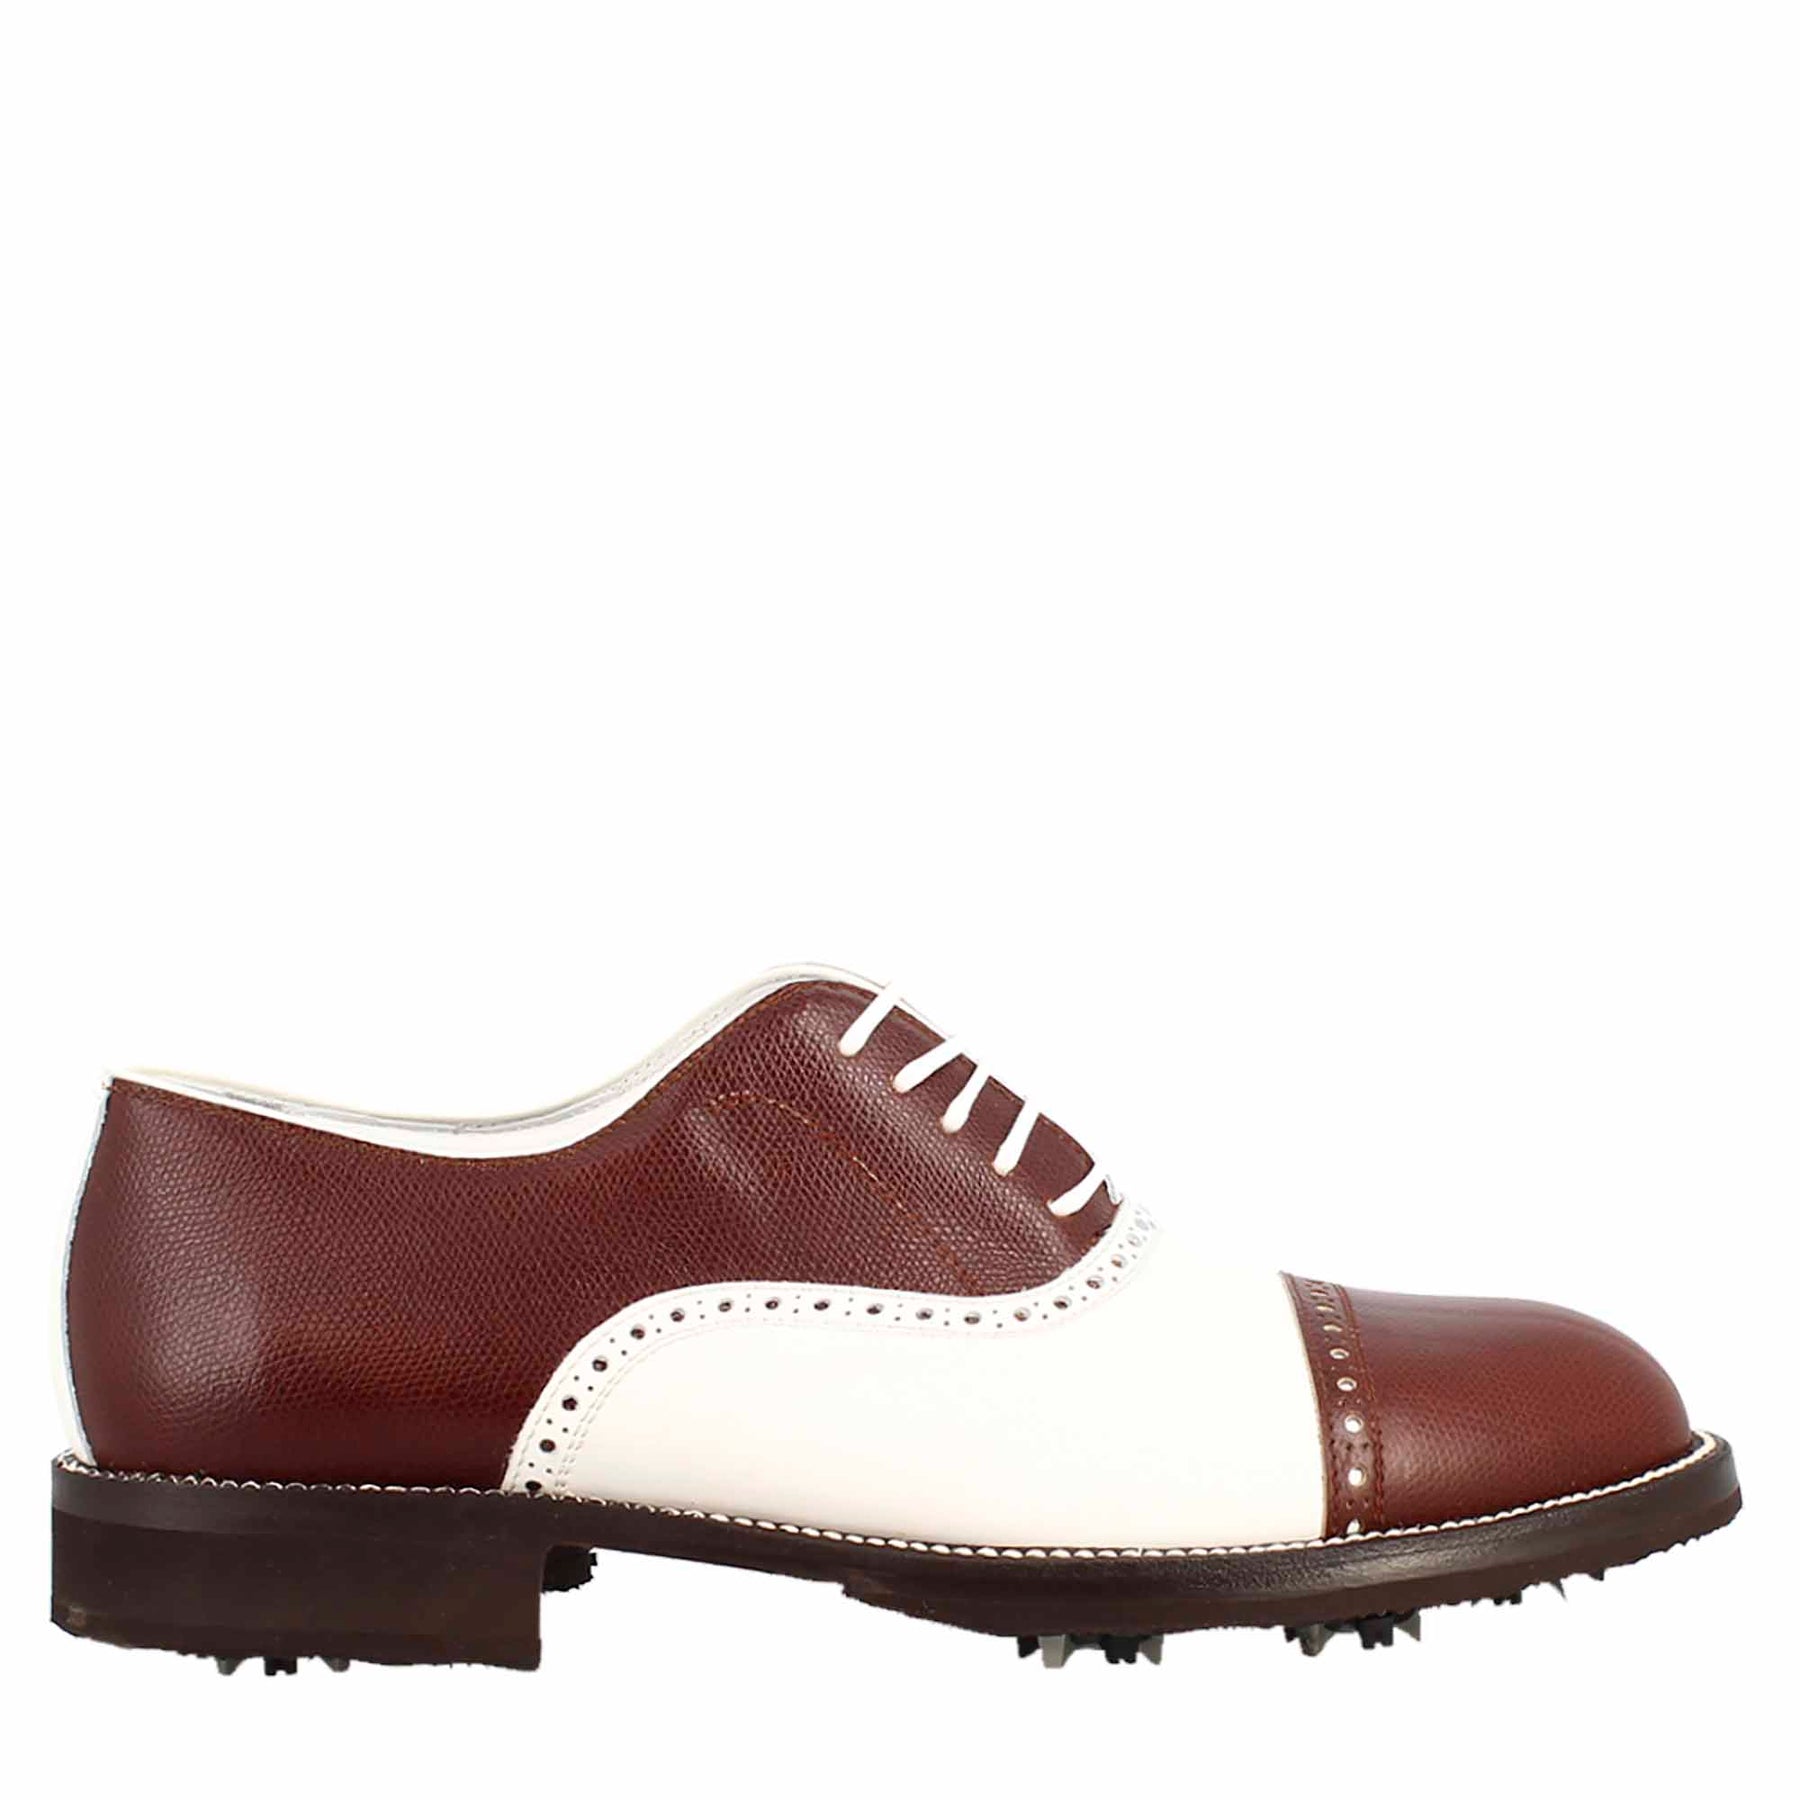 Handcrafted white and brown leather LRP men's golf shoes with brogue details